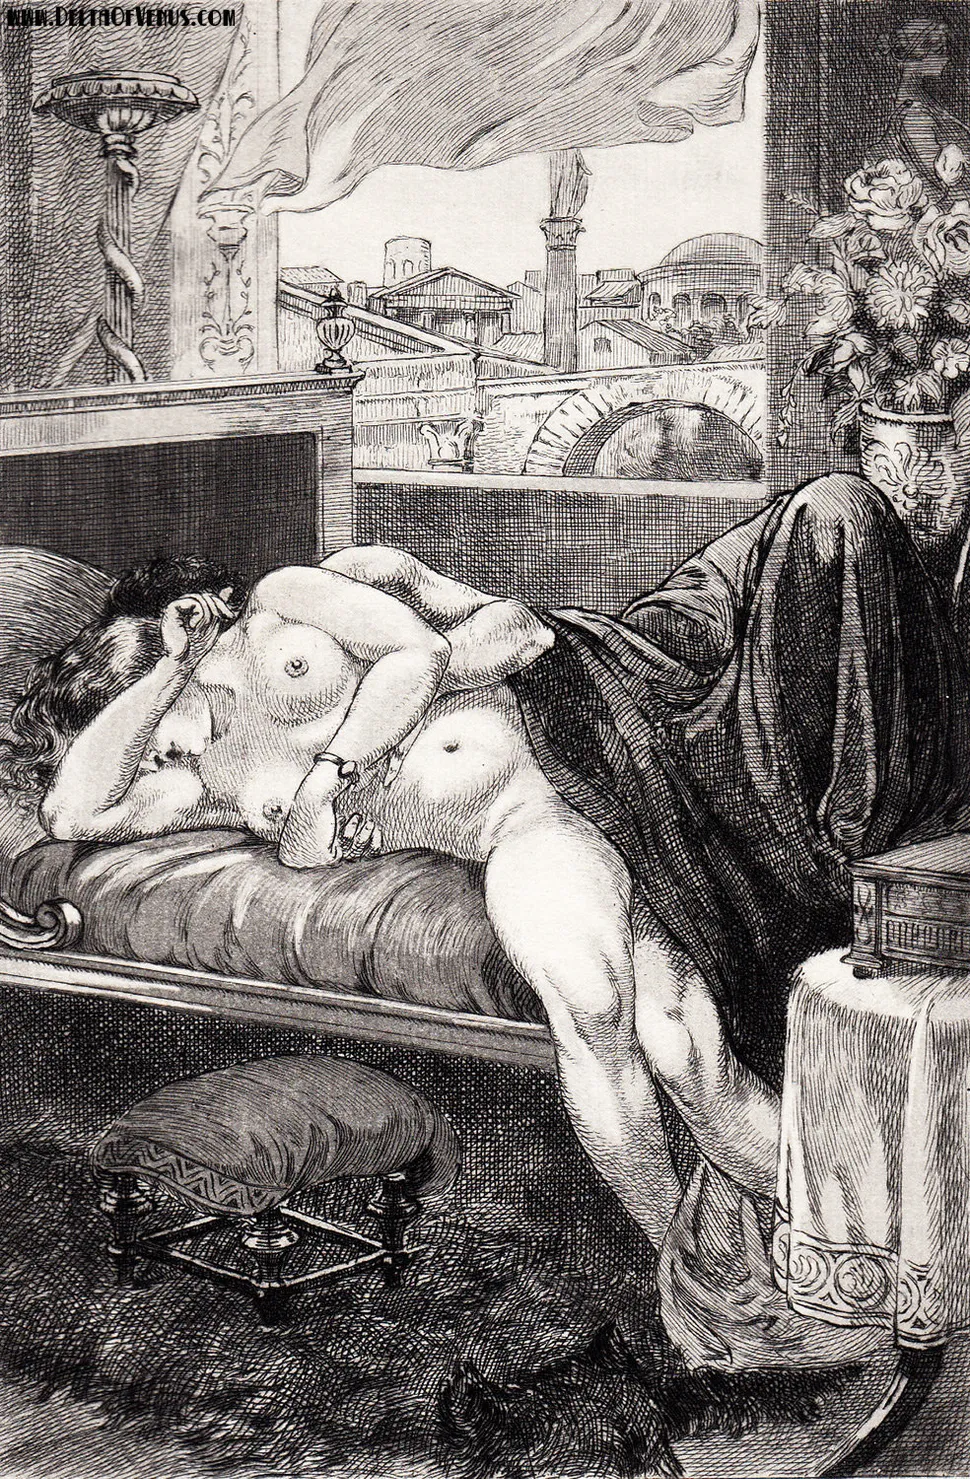 Vintage French Erotic Art - Dive Into The Fantasies Of An Obscure 19th Century Erotic Illustrator  (NSFW) | HuffPost Entertainment